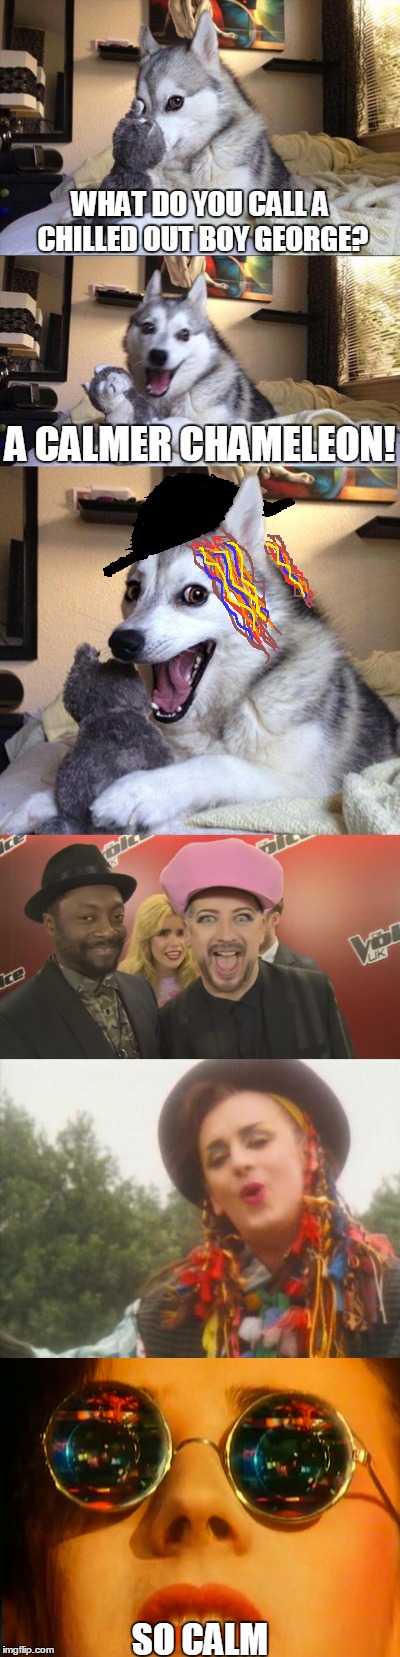 I know it's the wrong meme template, but the look on that dog's face says it all! | WHAT DO YOU CALL A CHILLED OUT BOY GEORGE? A CALMER CHAMELEON! SO CALM | image tagged in memes,funny,bad pun dog,boy george,culture club,karma chameleon | made w/ Imgflip meme maker